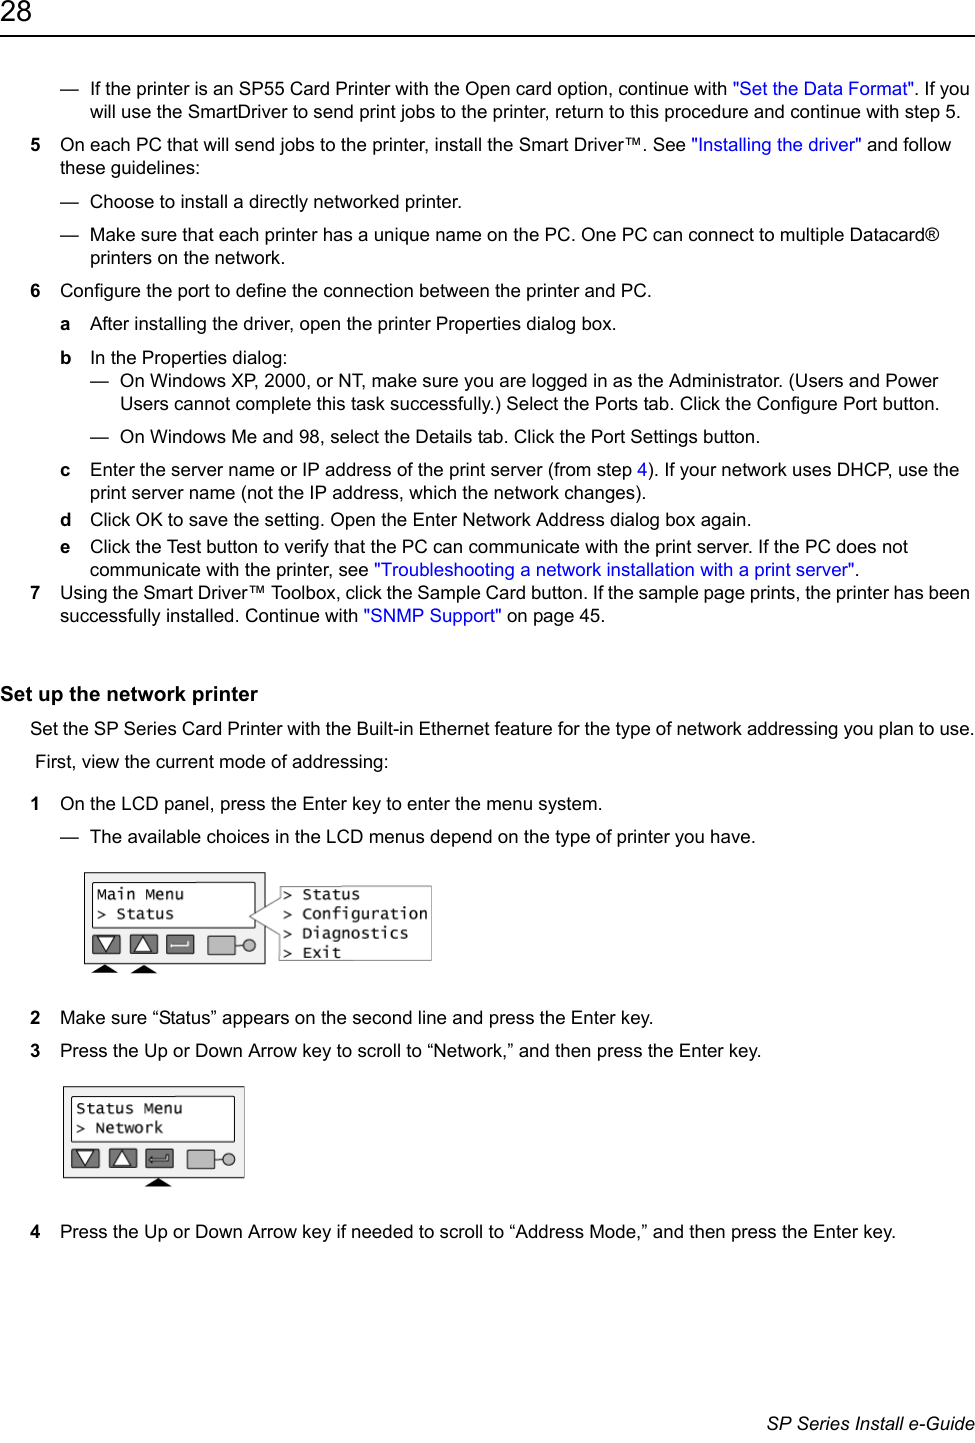 28                      SP Series Install e-Guide—  If the printer is an SP55 Card Printer with the Open card option, continue with &quot;Set the Data Format&quot;. If you will use the SmartDriver to send print jobs to the printer, return to this procedure and continue with step 5. 5On each PC that will send jobs to the printer, install the Smart Driver™. See &quot;Installing the driver&quot; and follow these guidelines:—  Choose to install a directly networked printer.—  Make sure that each printer has a unique name on the PC. One PC can connect to multiple Datacard® printers on the network.6Configure the port to define the connection between the printer and PC.aAfter installing the driver, open the printer Properties dialog box.bIn the Properties dialog:—  On Windows XP, 2000, or NT, make sure you are logged in as the Administrator. (Users and Power Users cannot complete this task successfully.) Select the Ports tab. Click the Configure Port button.—  On Windows Me and 98, select the Details tab. Click the Port Settings button.cEnter the server name or IP address of the print server (from step 4). If your network uses DHCP, use the print server name (not the IP address, which the network changes).dClick OK to save the setting. Open the Enter Network Address dialog box again.eClick the Test button to verify that the PC can communicate with the print server. If the PC does not communicate with the printer, see &quot;Troubleshooting a network installation with a print server&quot;.7Using the Smart Driver™ Toolbox, click the Sample Card button. If the sample page prints, the printer has been successfully installed. Continue with &quot;SNMP Support&quot; on page 45.Set up the network printerSet the SP Series Card Printer with the Built-in Ethernet feature for the type of network addressing you plan to use. First, view the current mode of addressing:1On the LCD panel, press the Enter key to enter the menu system.—  The available choices in the LCD menus depend on the type of printer you have.2Make sure “Status” appears on the second line and press the Enter key.3Press the Up or Down Arrow key to scroll to “Network,” and then press the Enter key.4Press the Up or Down Arrow key if needed to scroll to “Address Mode,” and then press the Enter key.